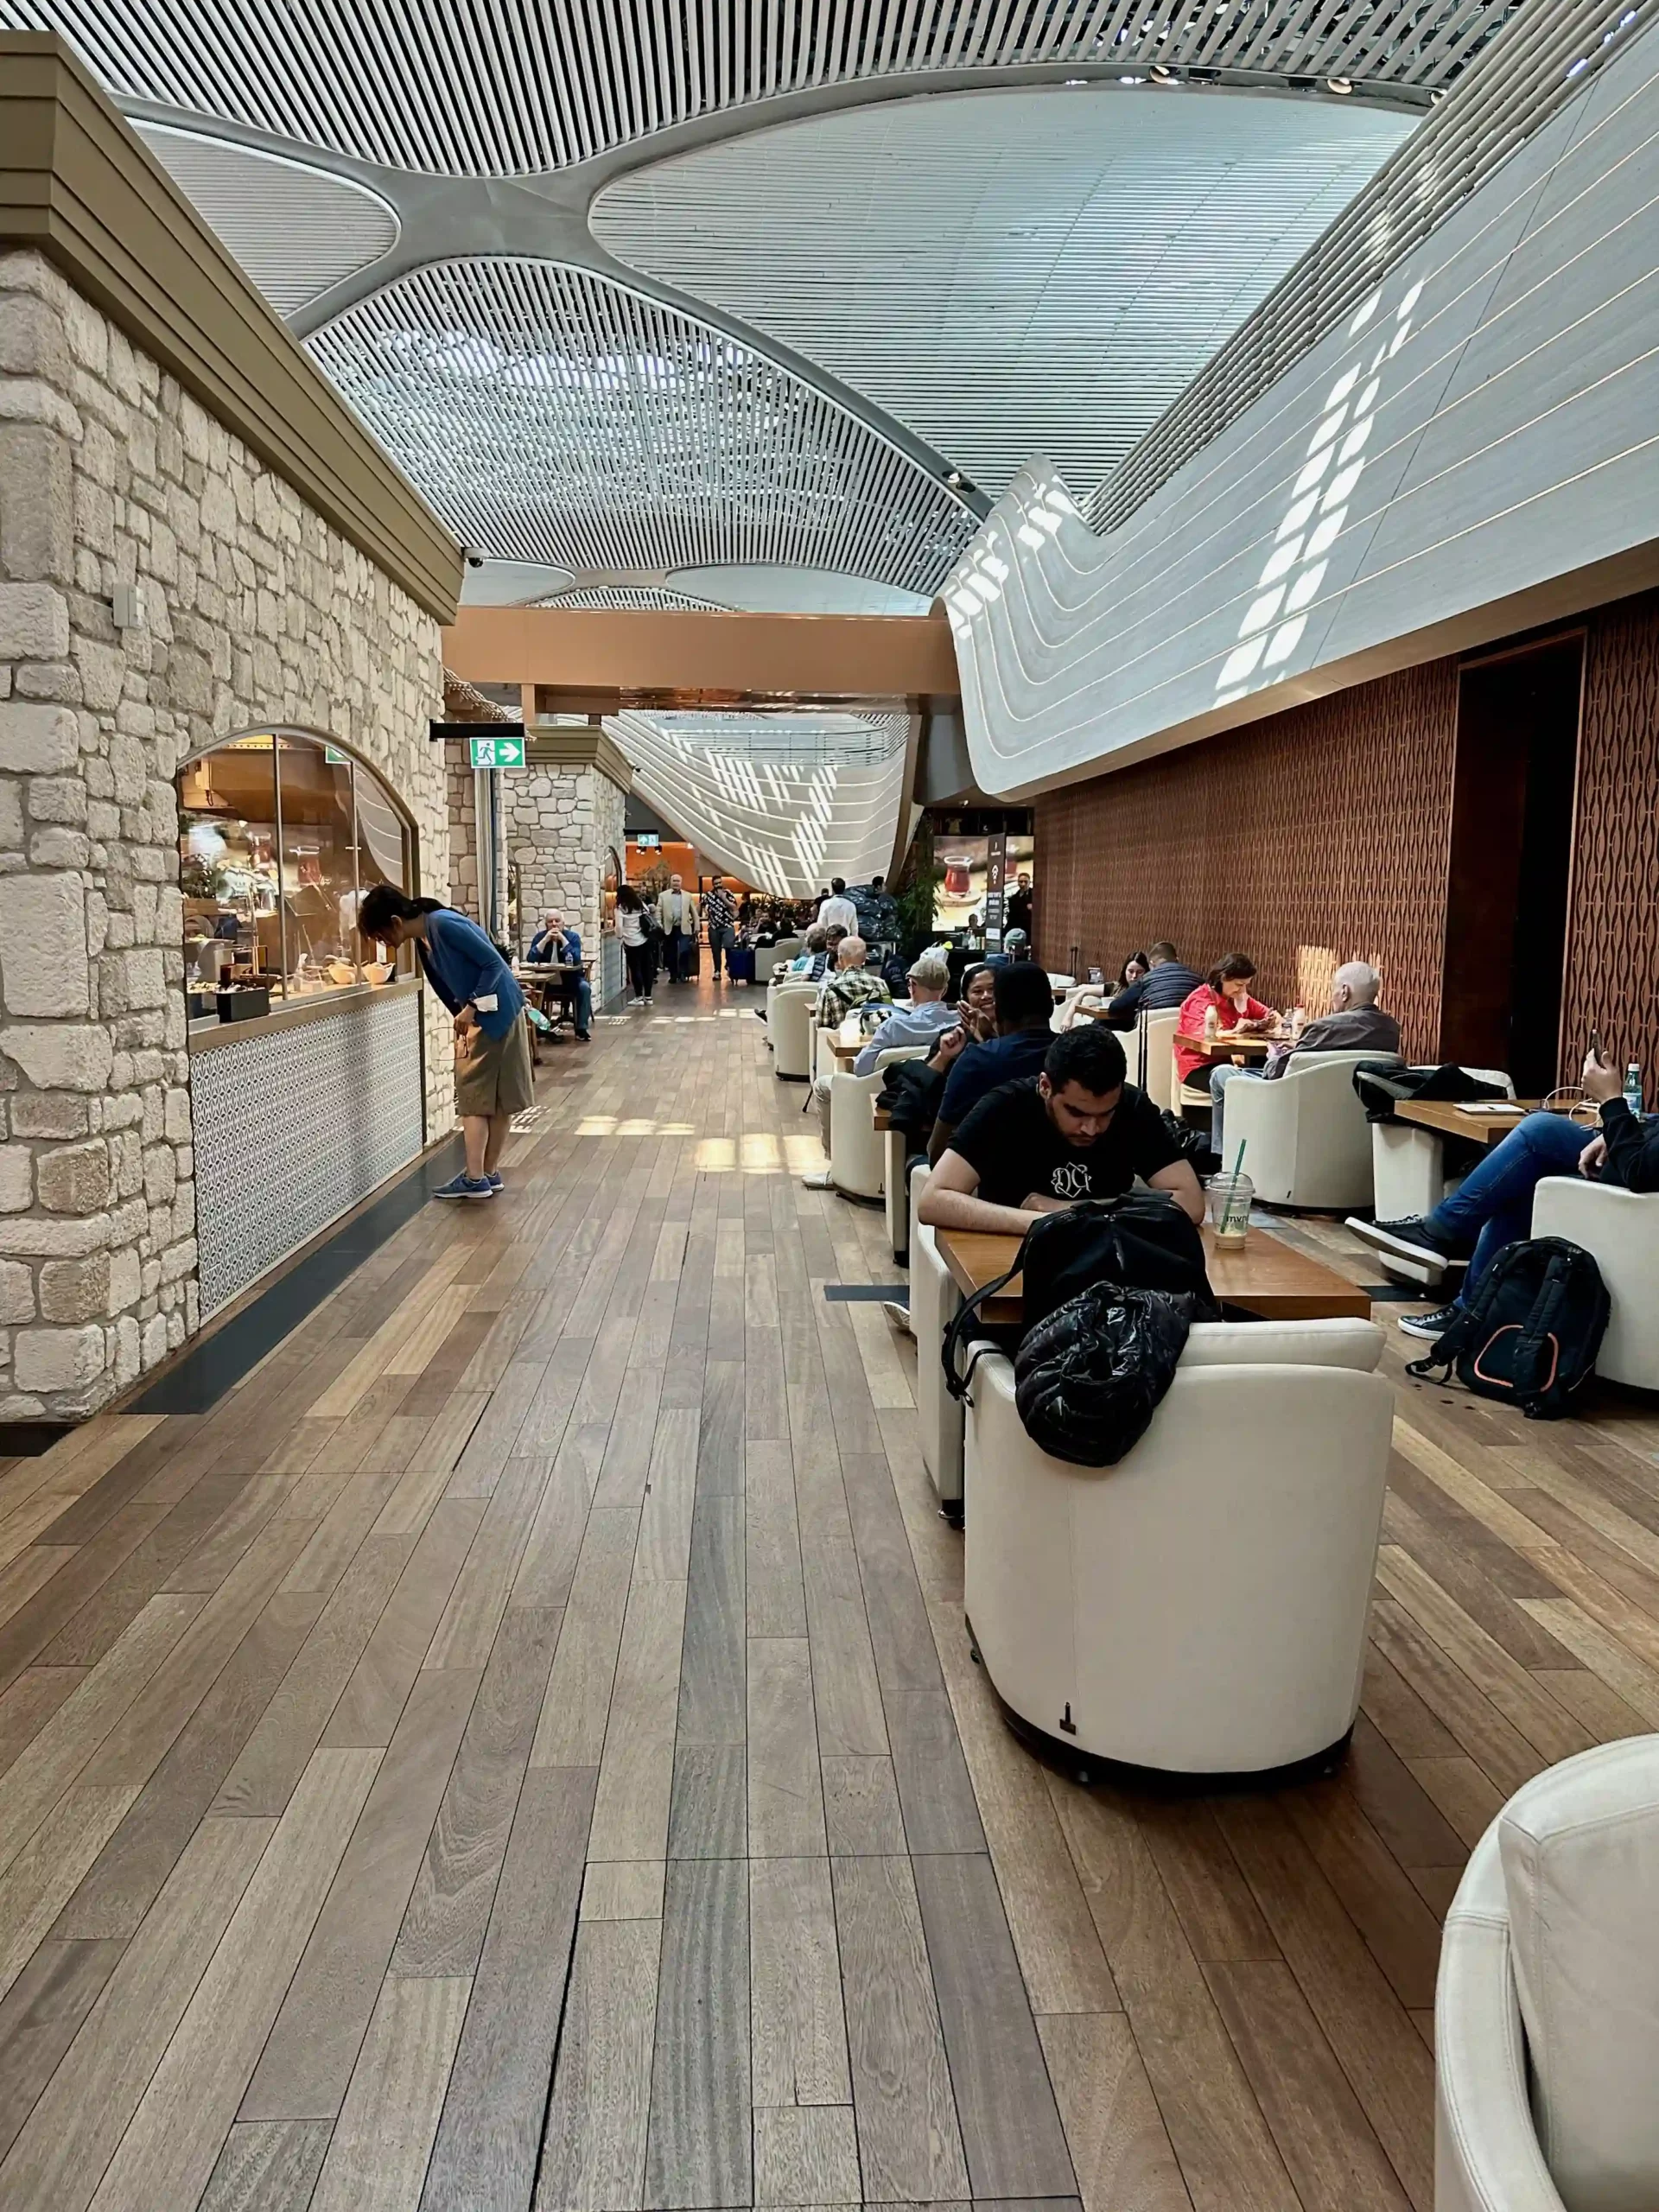 people sitting at tables in a mall